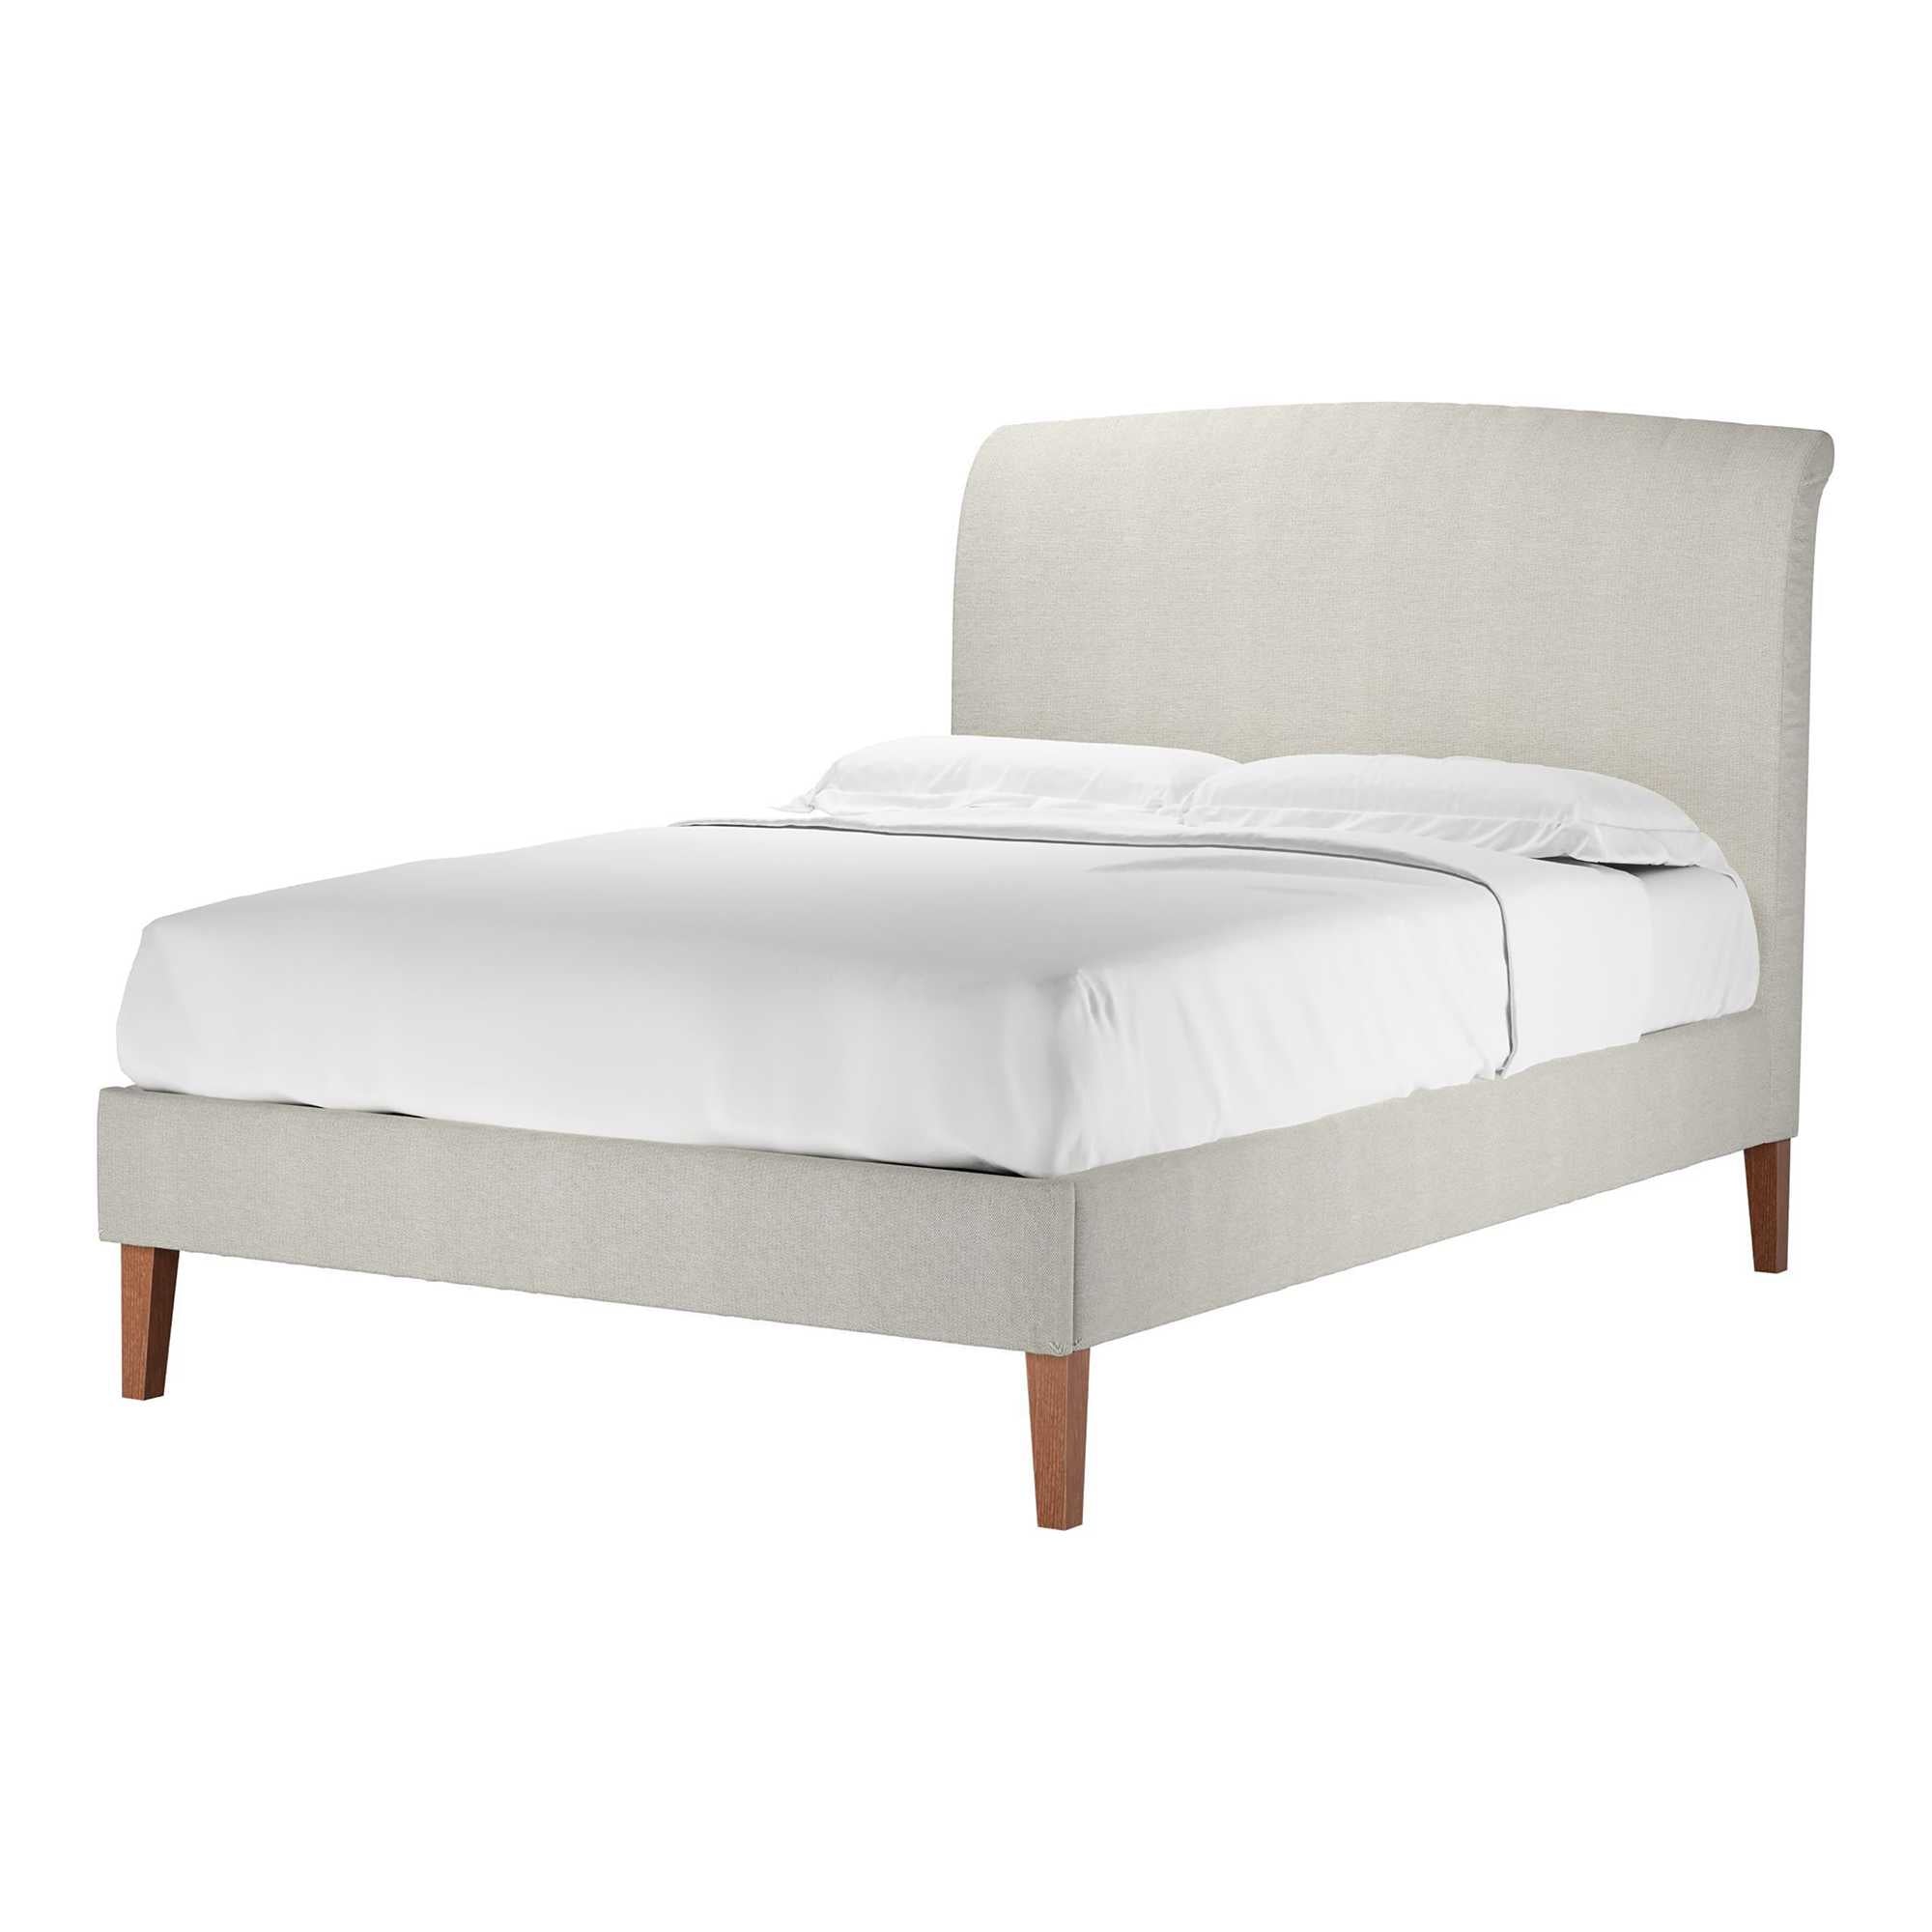 Thea Clay House Basket Weave Bed - Double Size